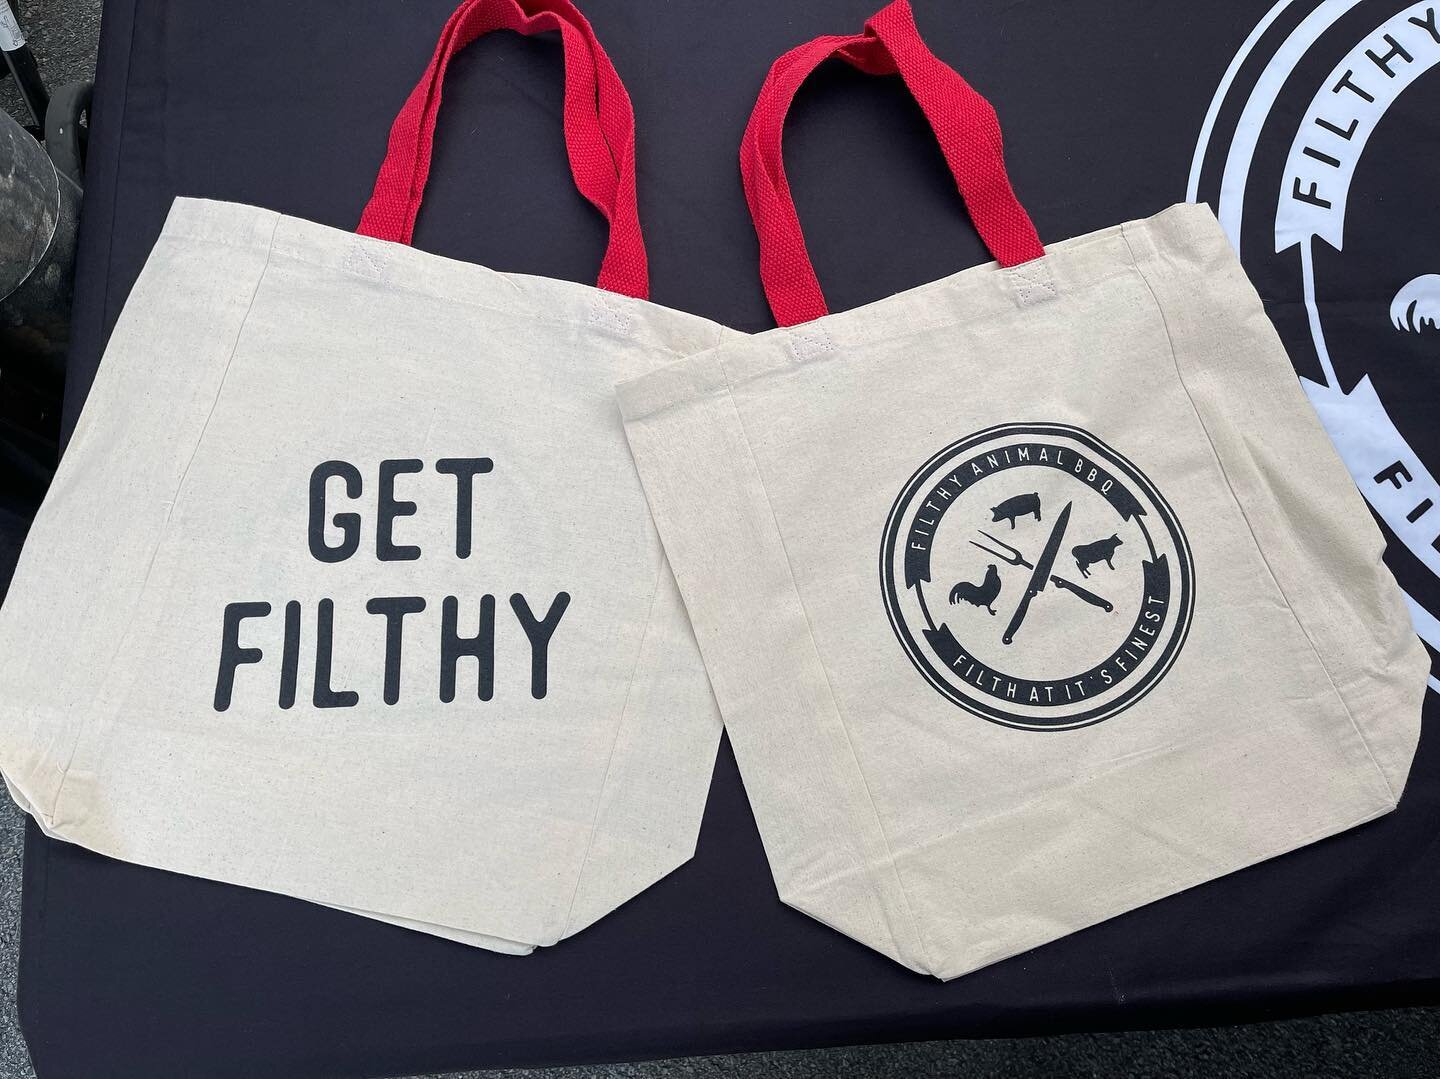 🚨🚨NEW MERCH ALERT🚨🚨

In the spirit of our farmers market friends, we have a limited run of reusable farmers market bags!!! We want you to be a FILTHY Animal, not an ignorant one!!

#filthatitsfinest #filthyanimalbbq #Getfilthy #shoplocal #beef #b